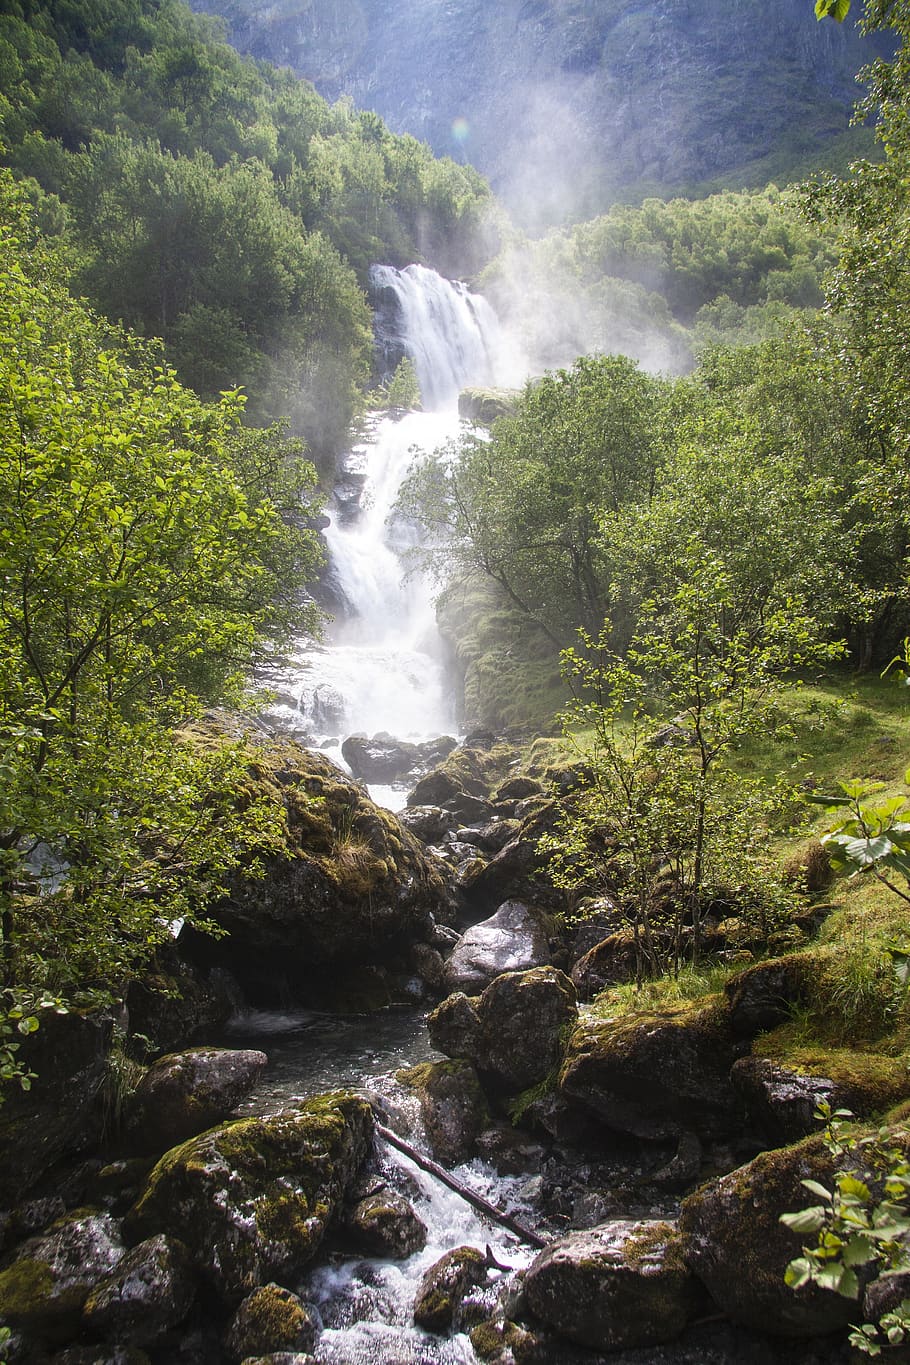 nature, norway, landscape, mountain, river, tree, summer, outdoors, waterfall, outdoor